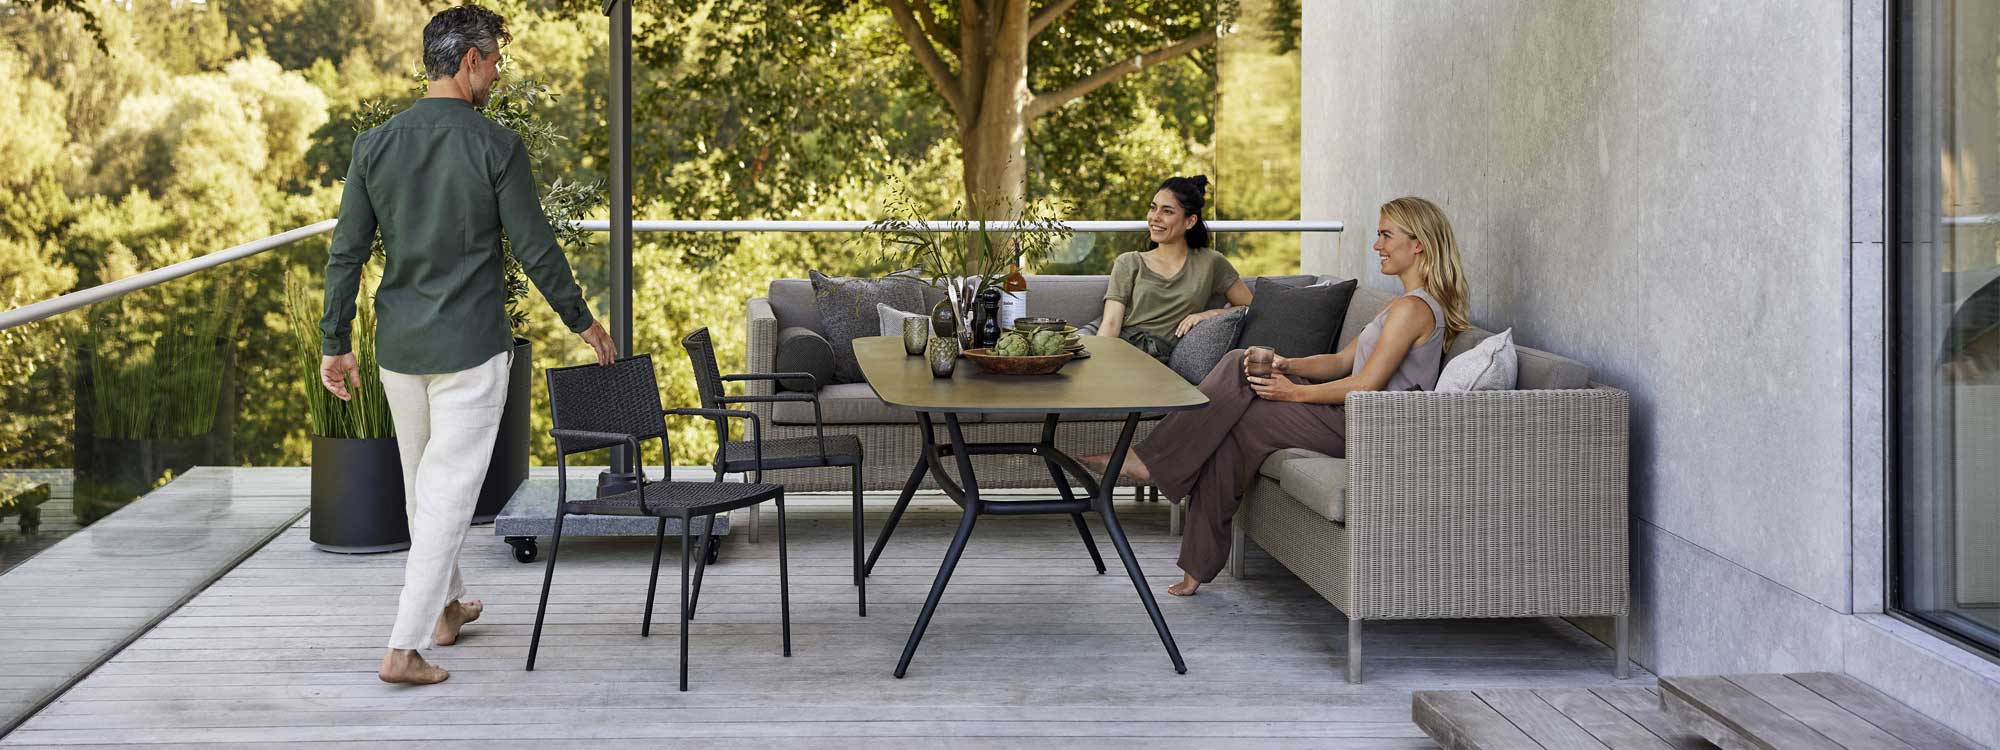 Image of Connect Dining Lounge corner sofa and Less chairs around Joy table by Cane-line garden furniture